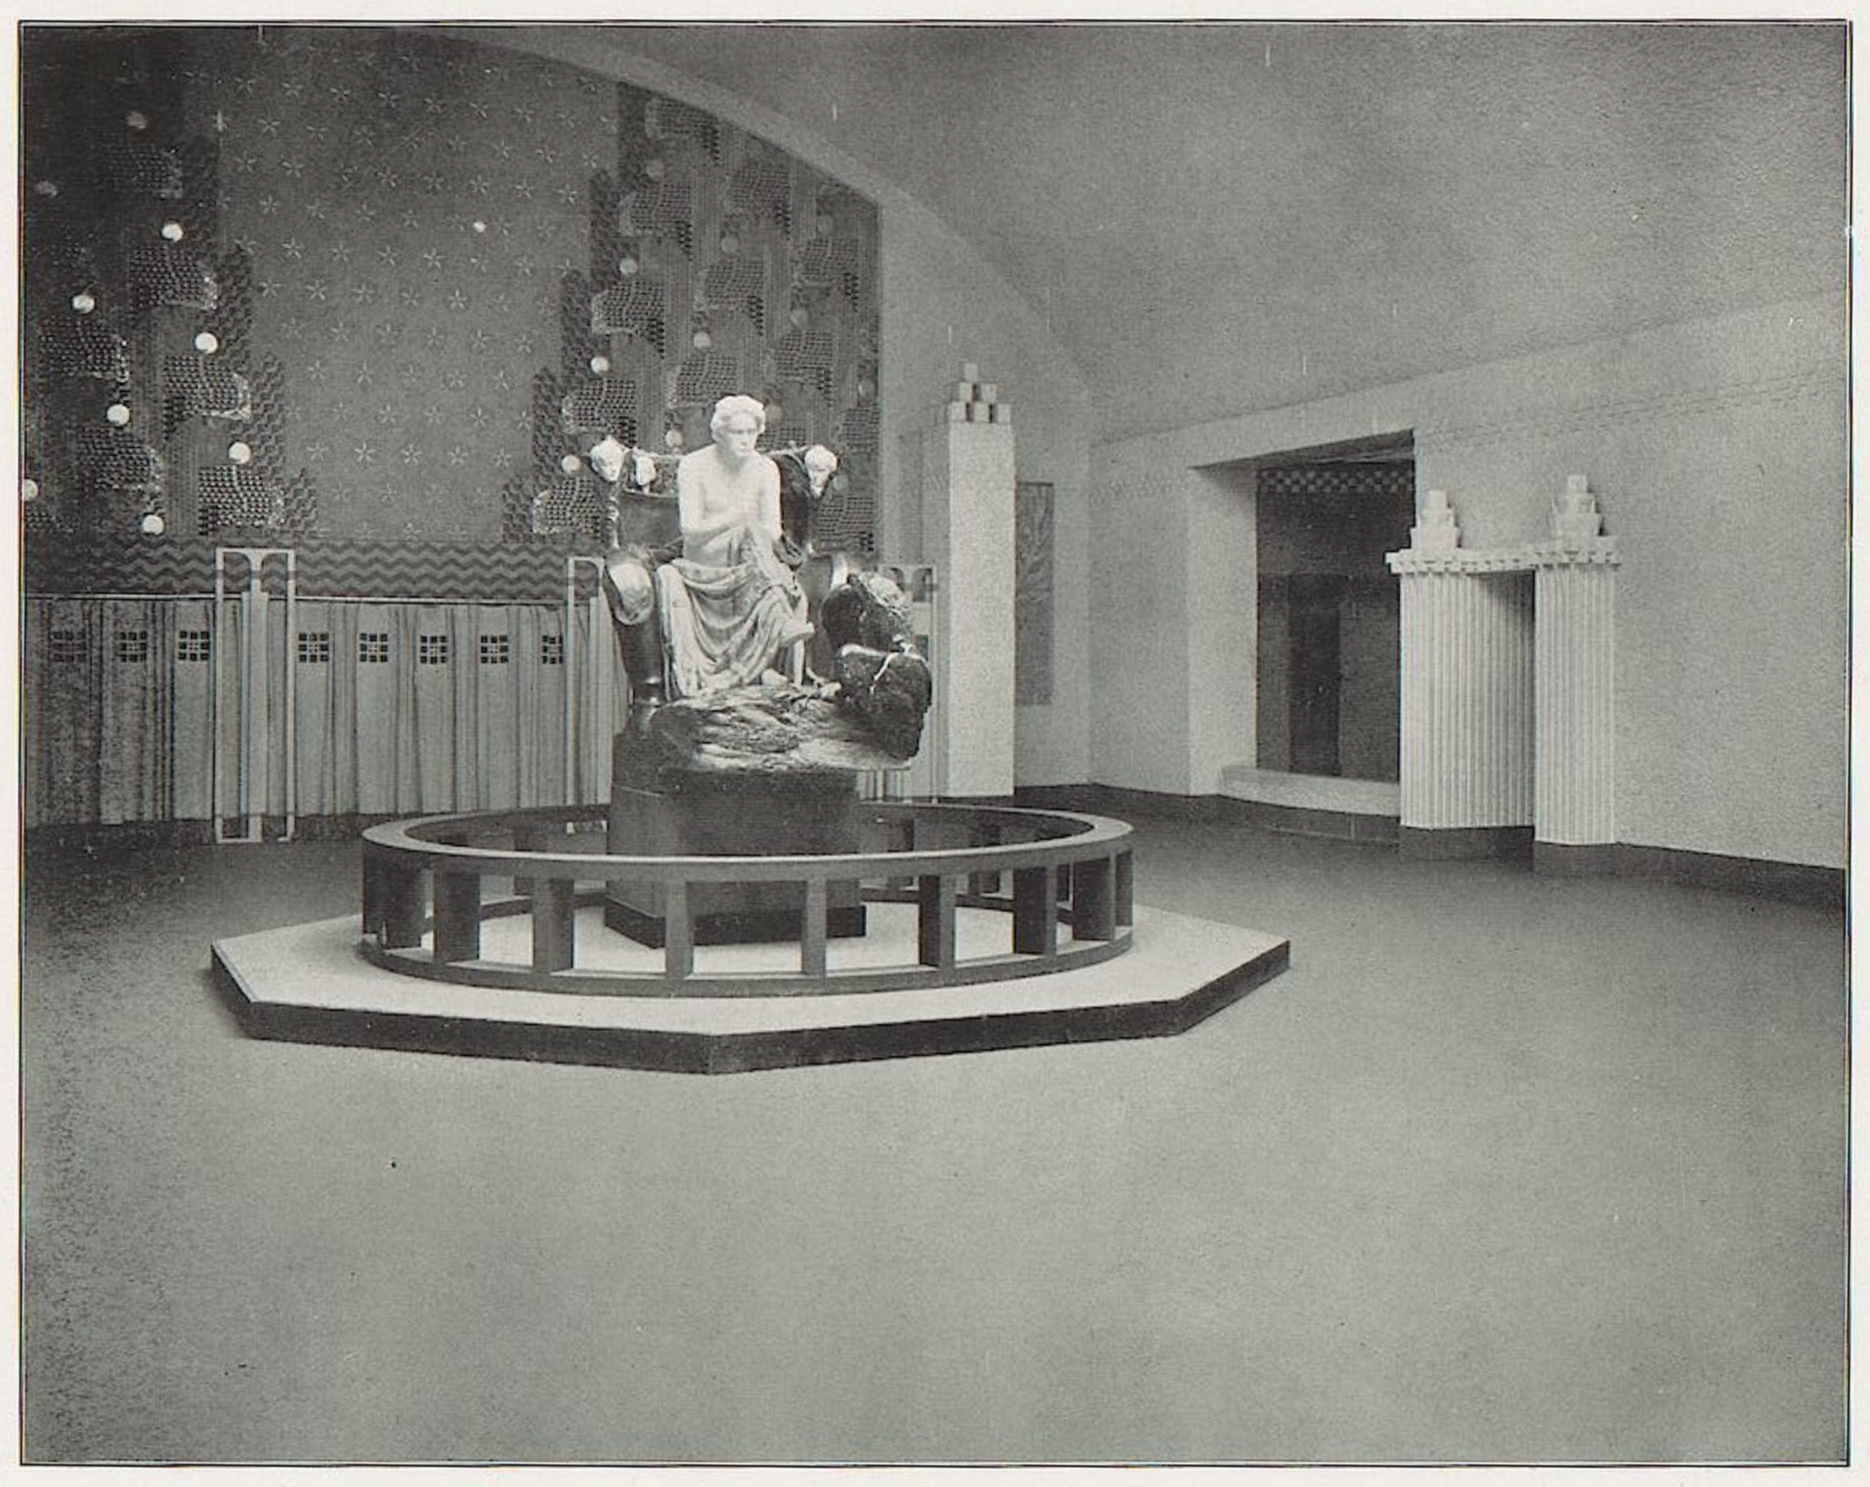 XIVth exhibition 1902, main hall with Beethoven statue by Max Klinger (photo: Archive of Secession)